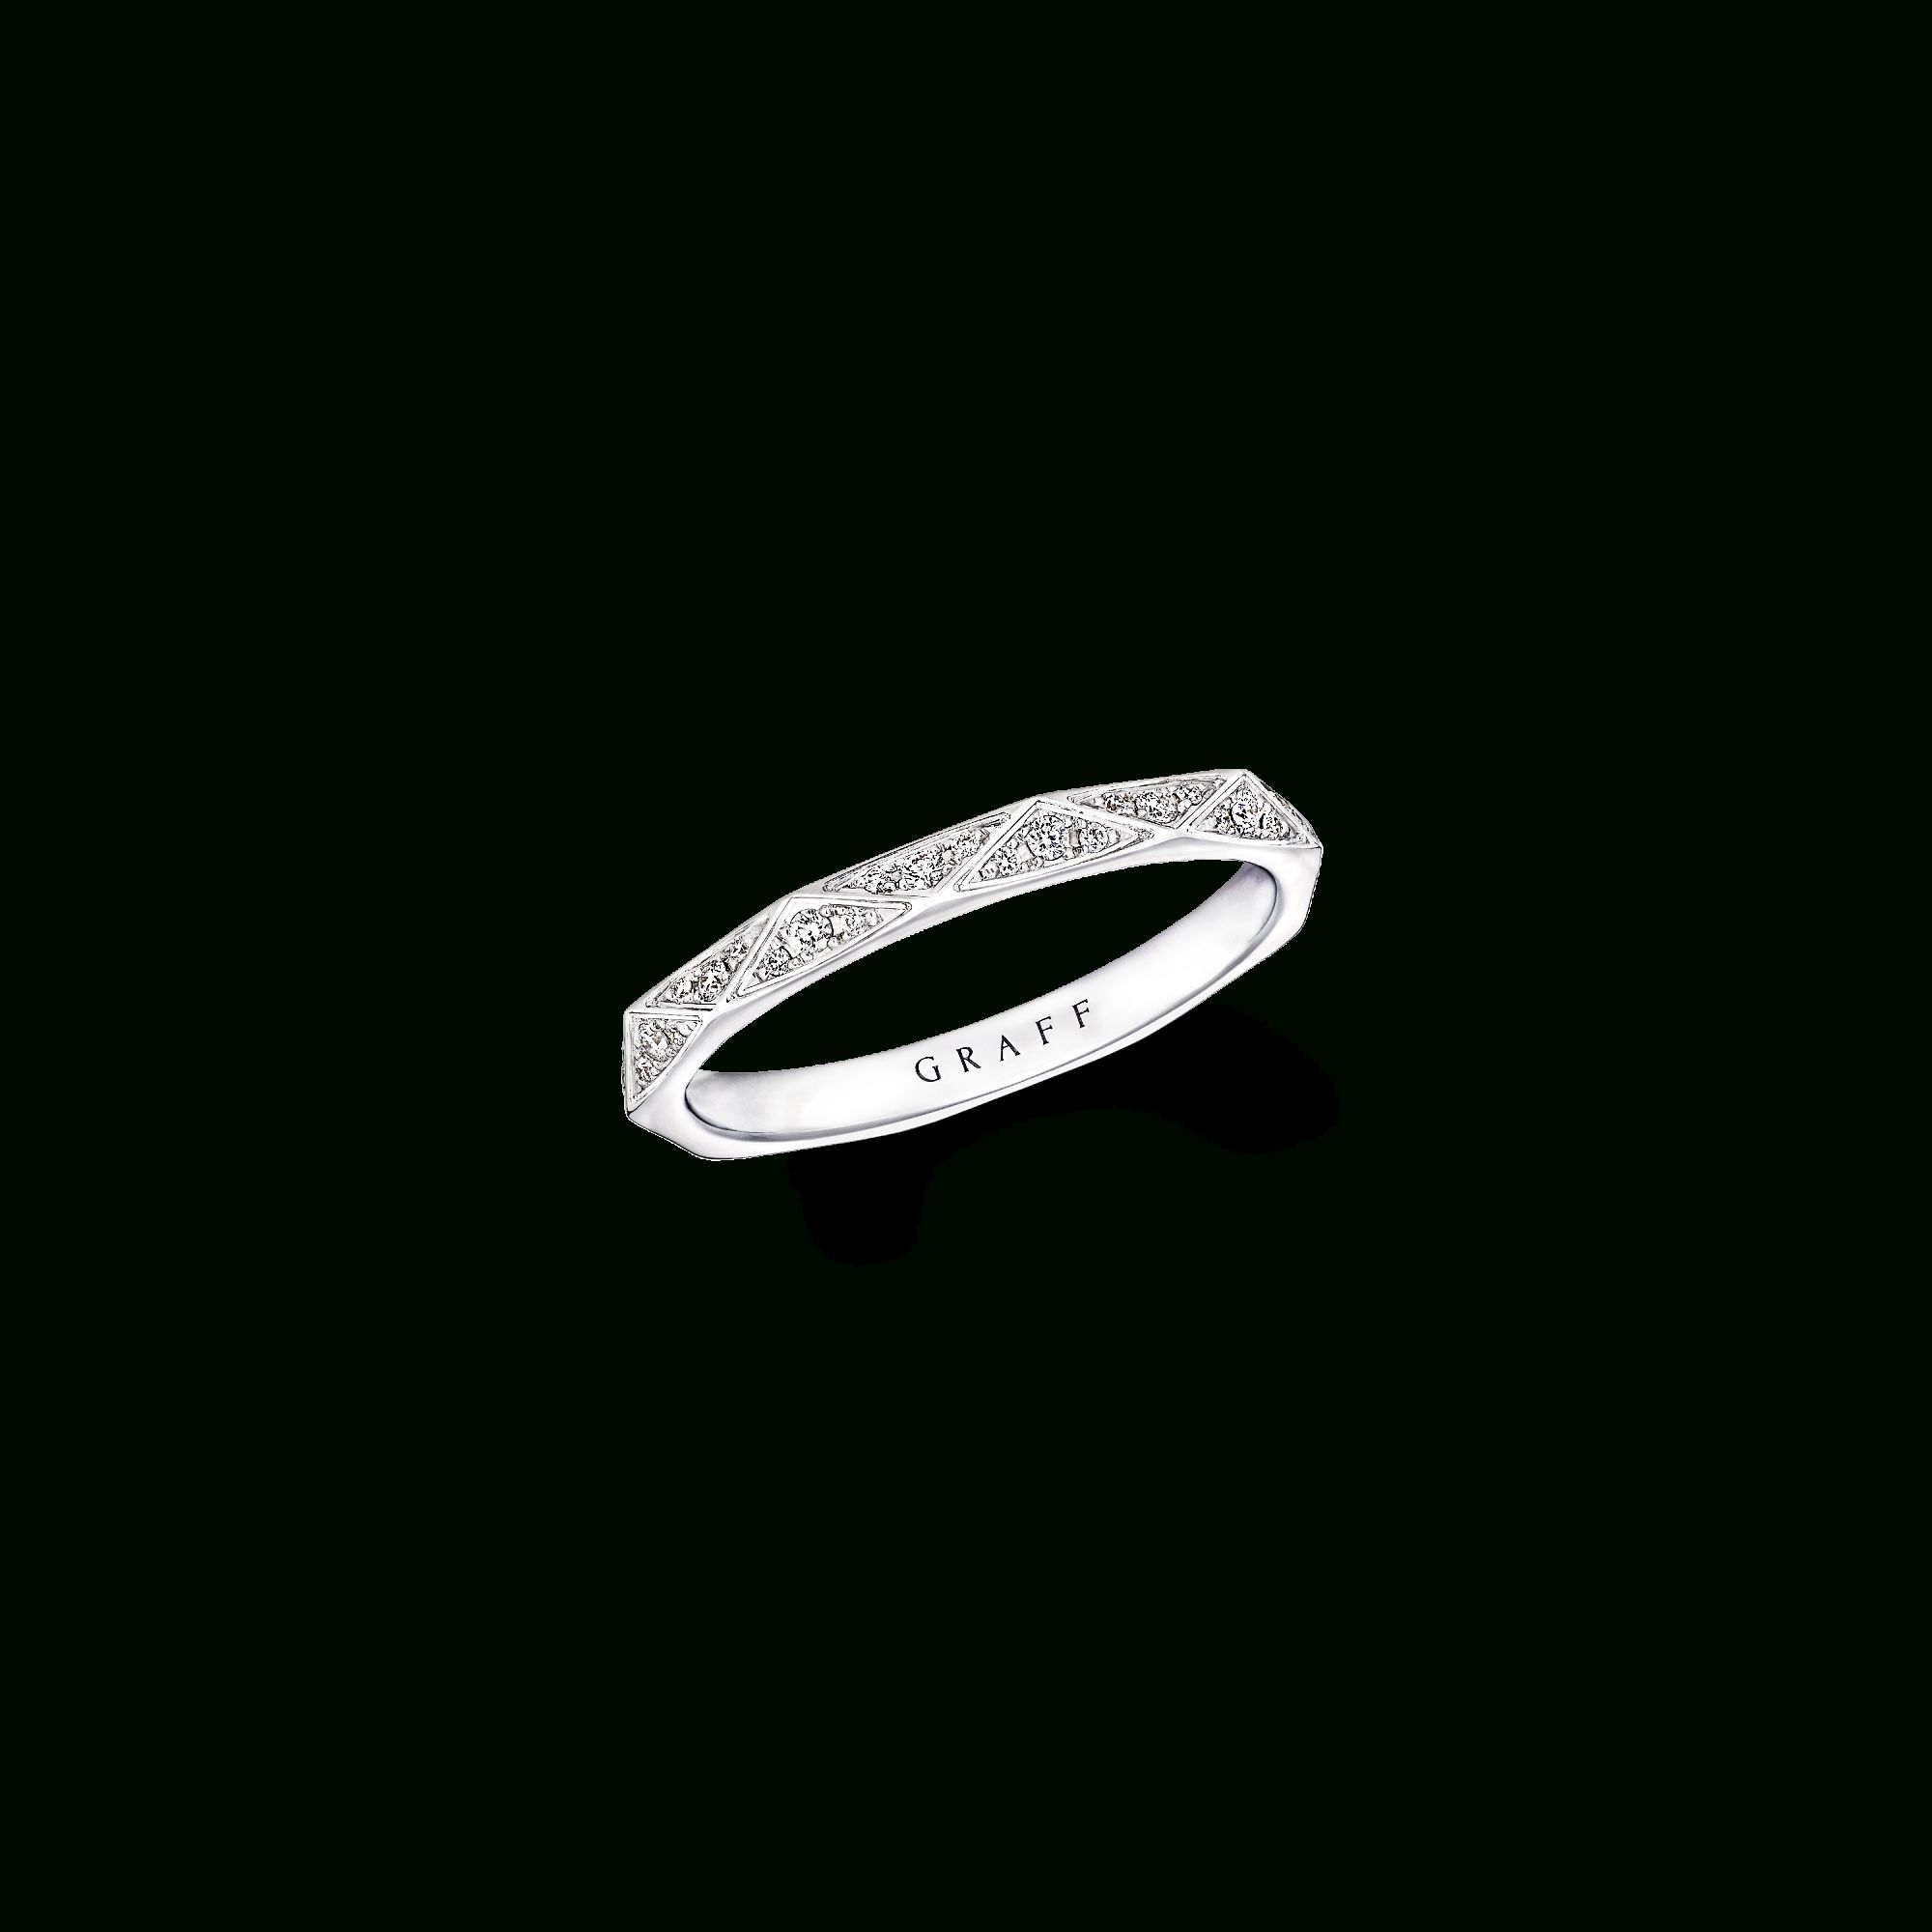 Signature Pavé Wedding Band, White Gold | Graff Intended For 2018 Signature Bands Ring (View 5 of 25)